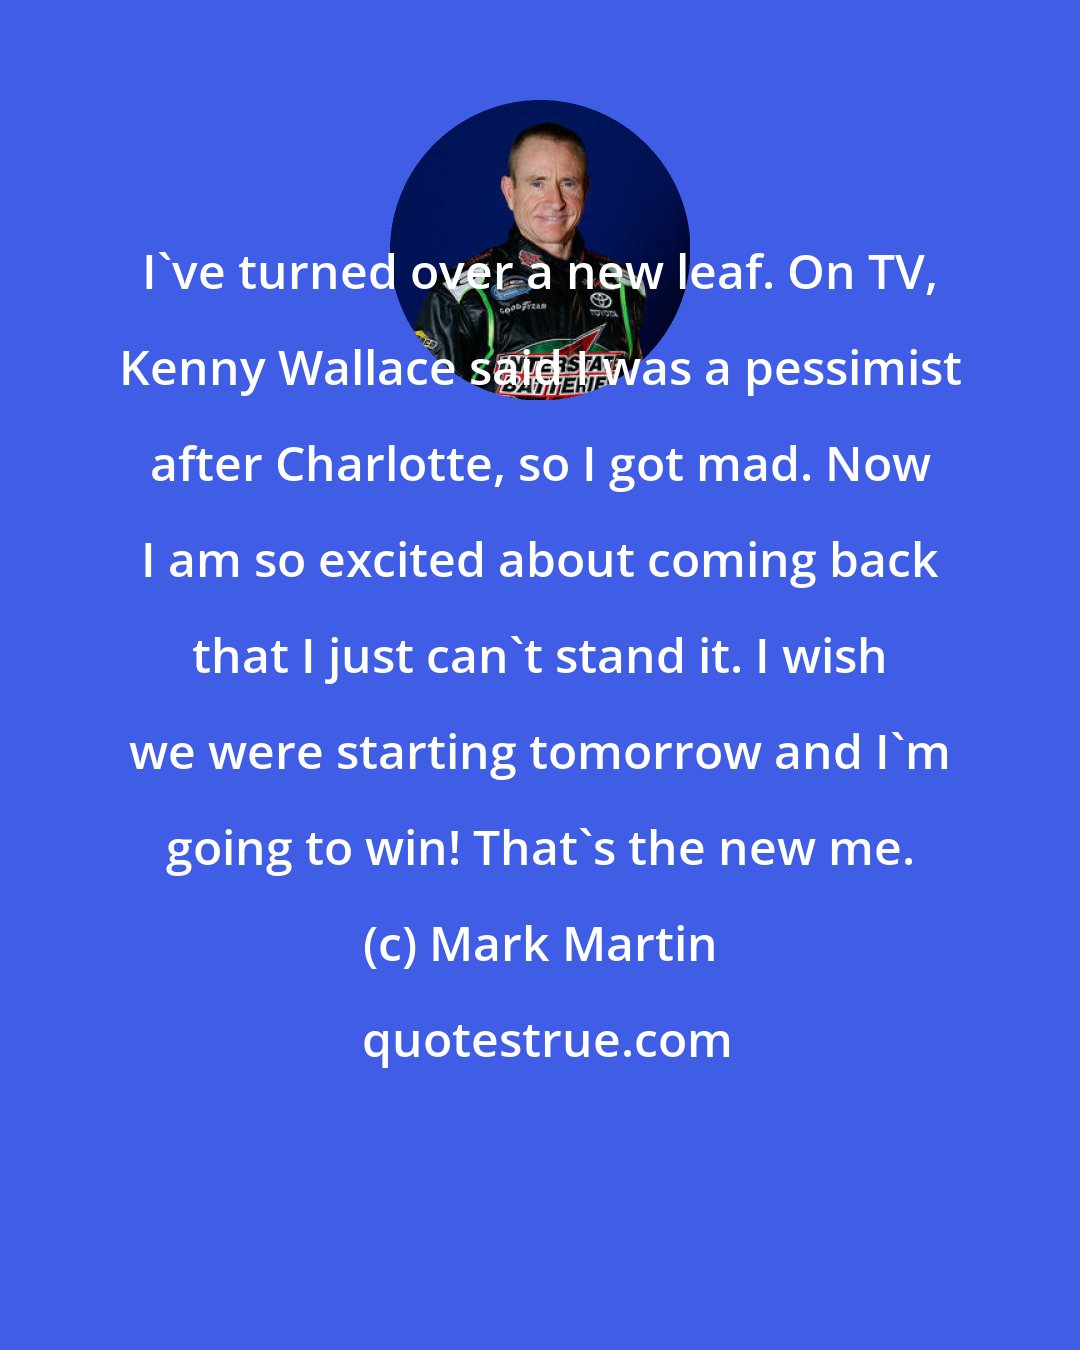 Mark Martin: I've turned over a new leaf. On TV, Kenny Wallace said I was a pessimist after Charlotte, so I got mad. Now I am so excited about coming back that I just can't stand it. I wish we were starting tomorrow and I'm going to win! That's the new me.